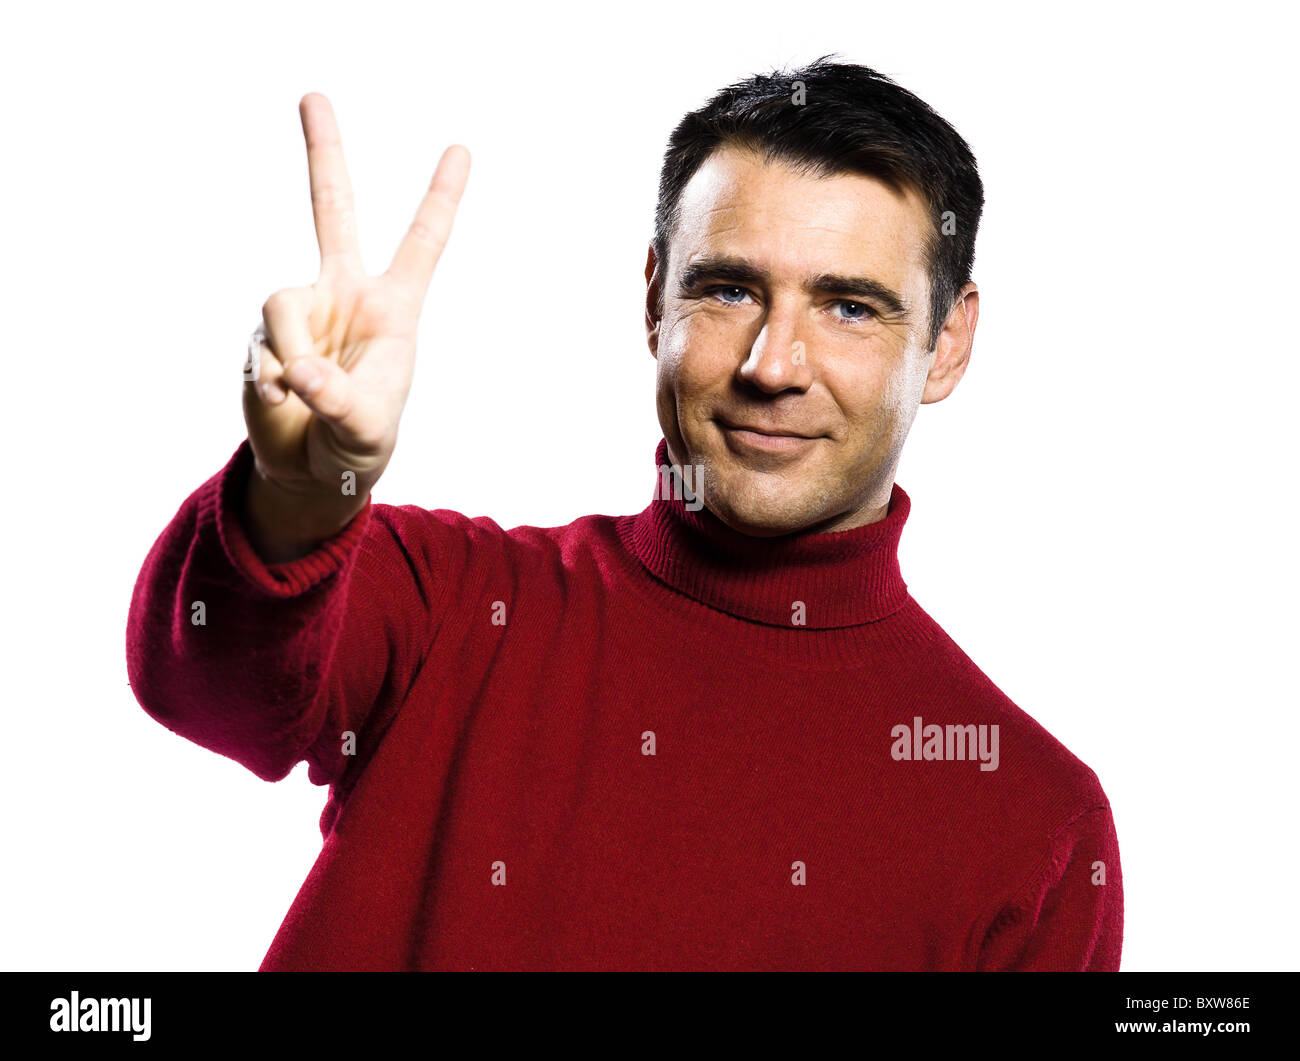 caucasian man 2 two  counting showing  fingers  gesture studio portrait on isolated white backgound Stock Photo